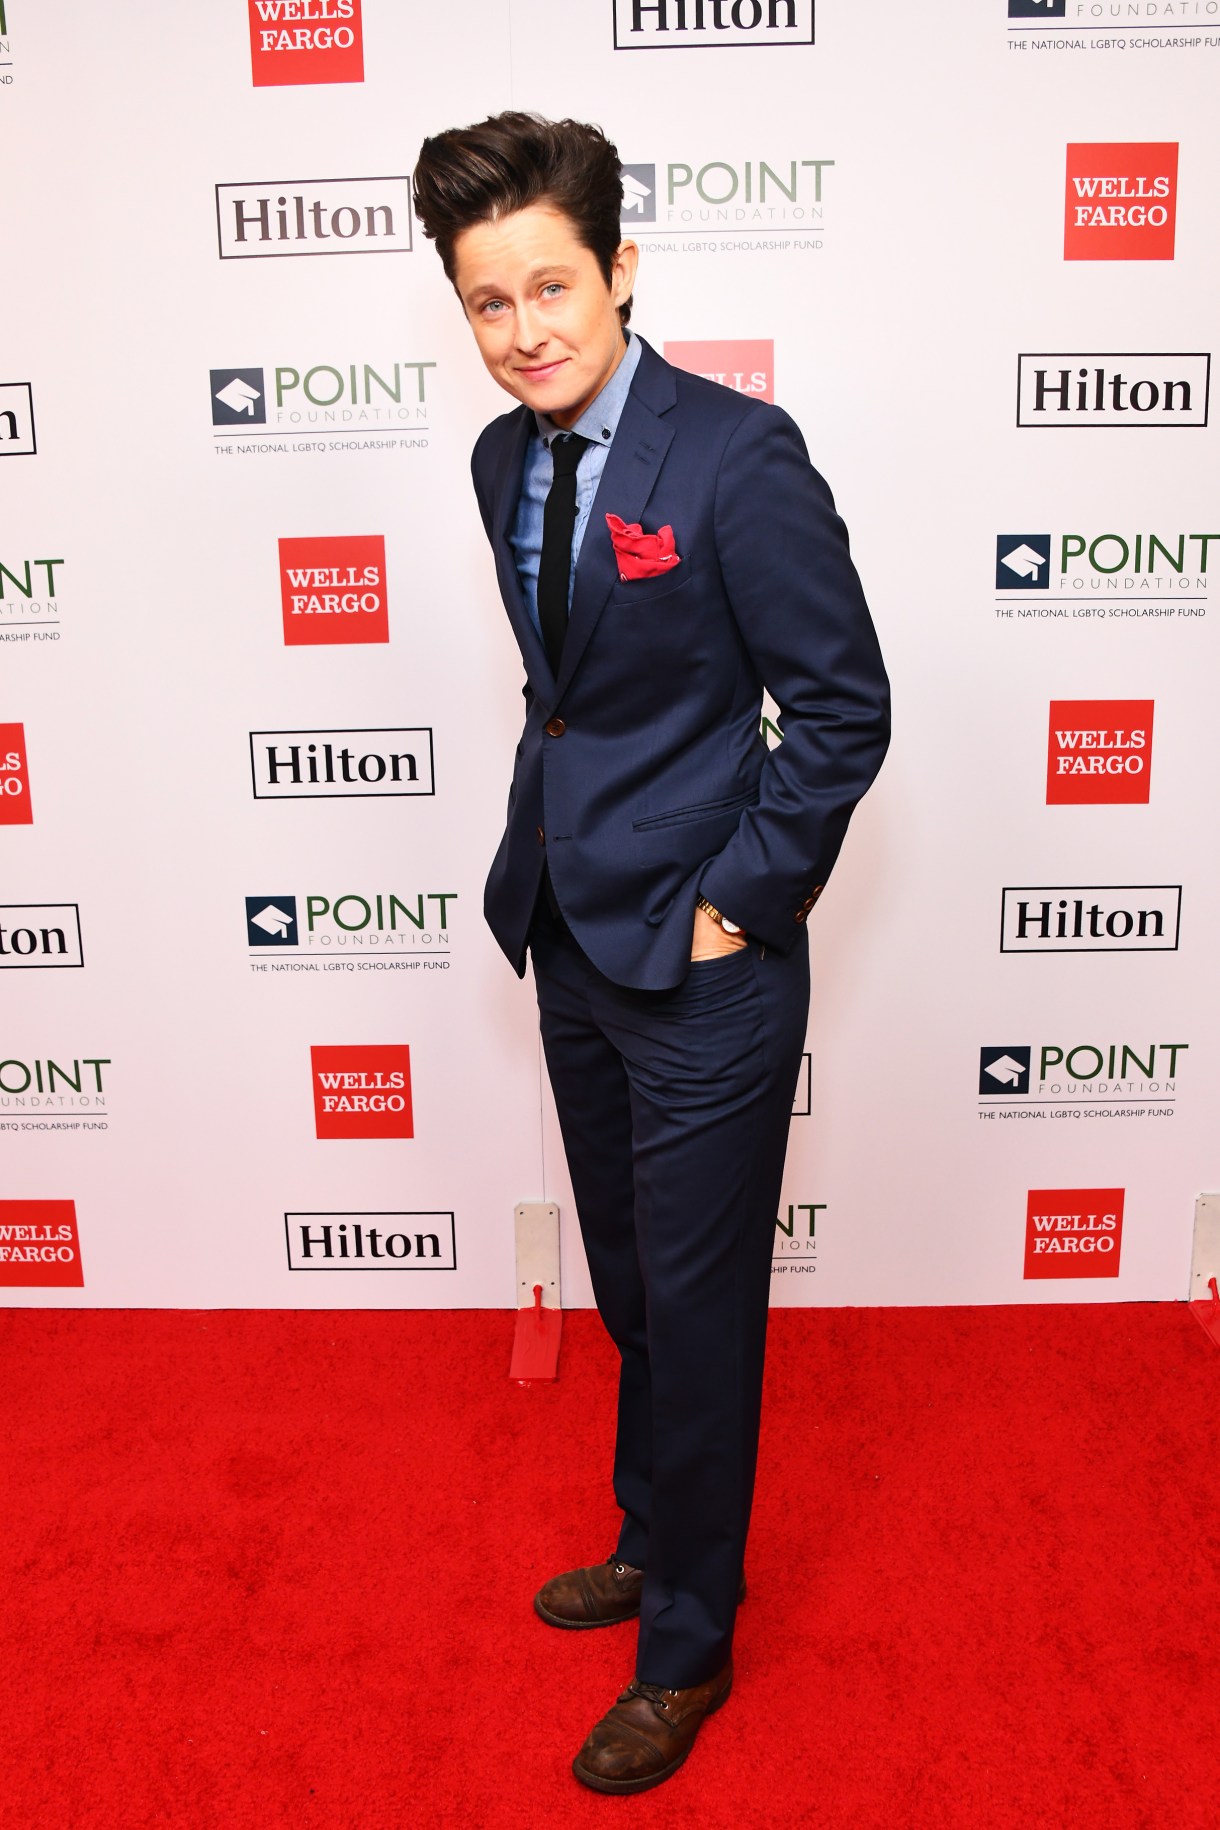 BEVERLY HILLS, CALIFORNIA - OCTOBER 12: River Butcher attends Point Honors Los Angeles 2019, Benefitting Point Foundation at The Beverly Hilton Hotel on October 12, 2019 in Beverly Hills, California. (Photo by Araya Diaz/Getty Images for Point Foundation)